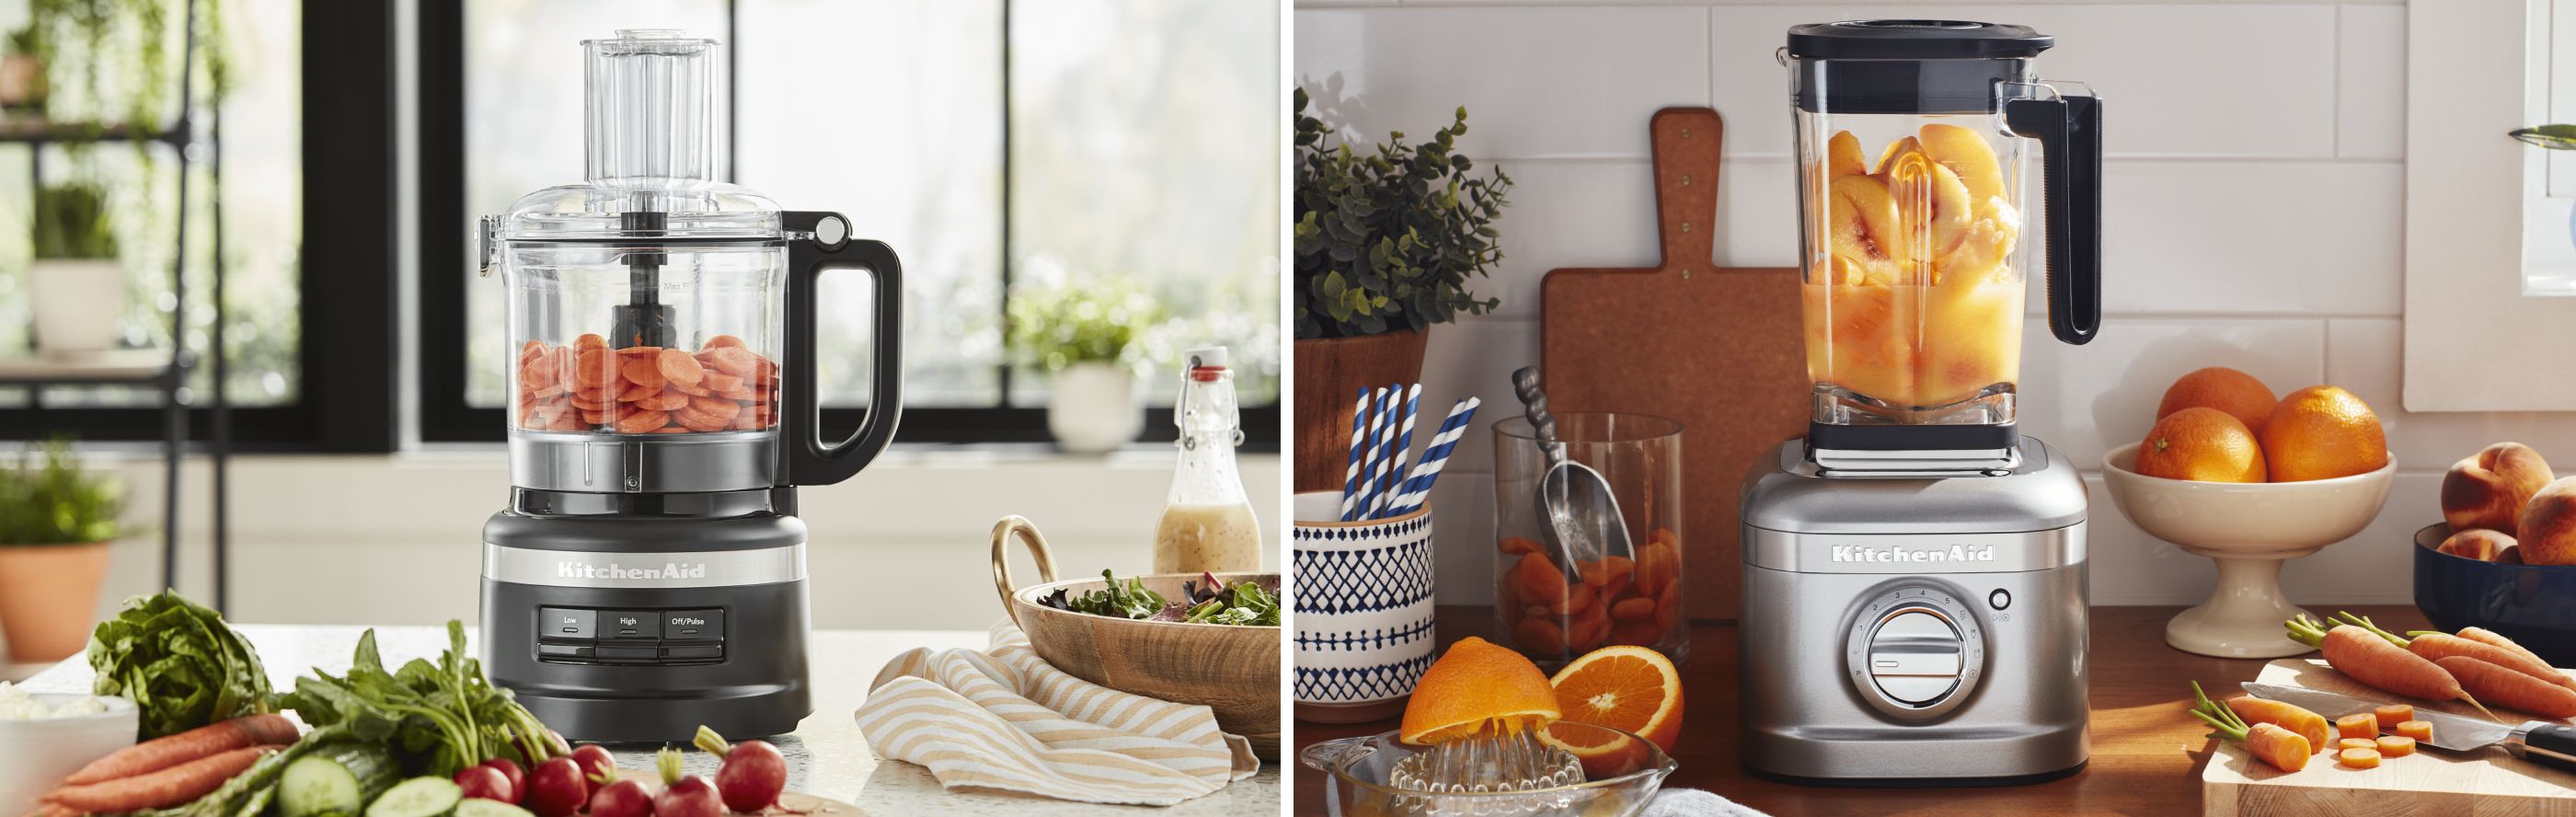 Two side-by-side images of a KitchenAid® blender and a KitchenAid® food processor.